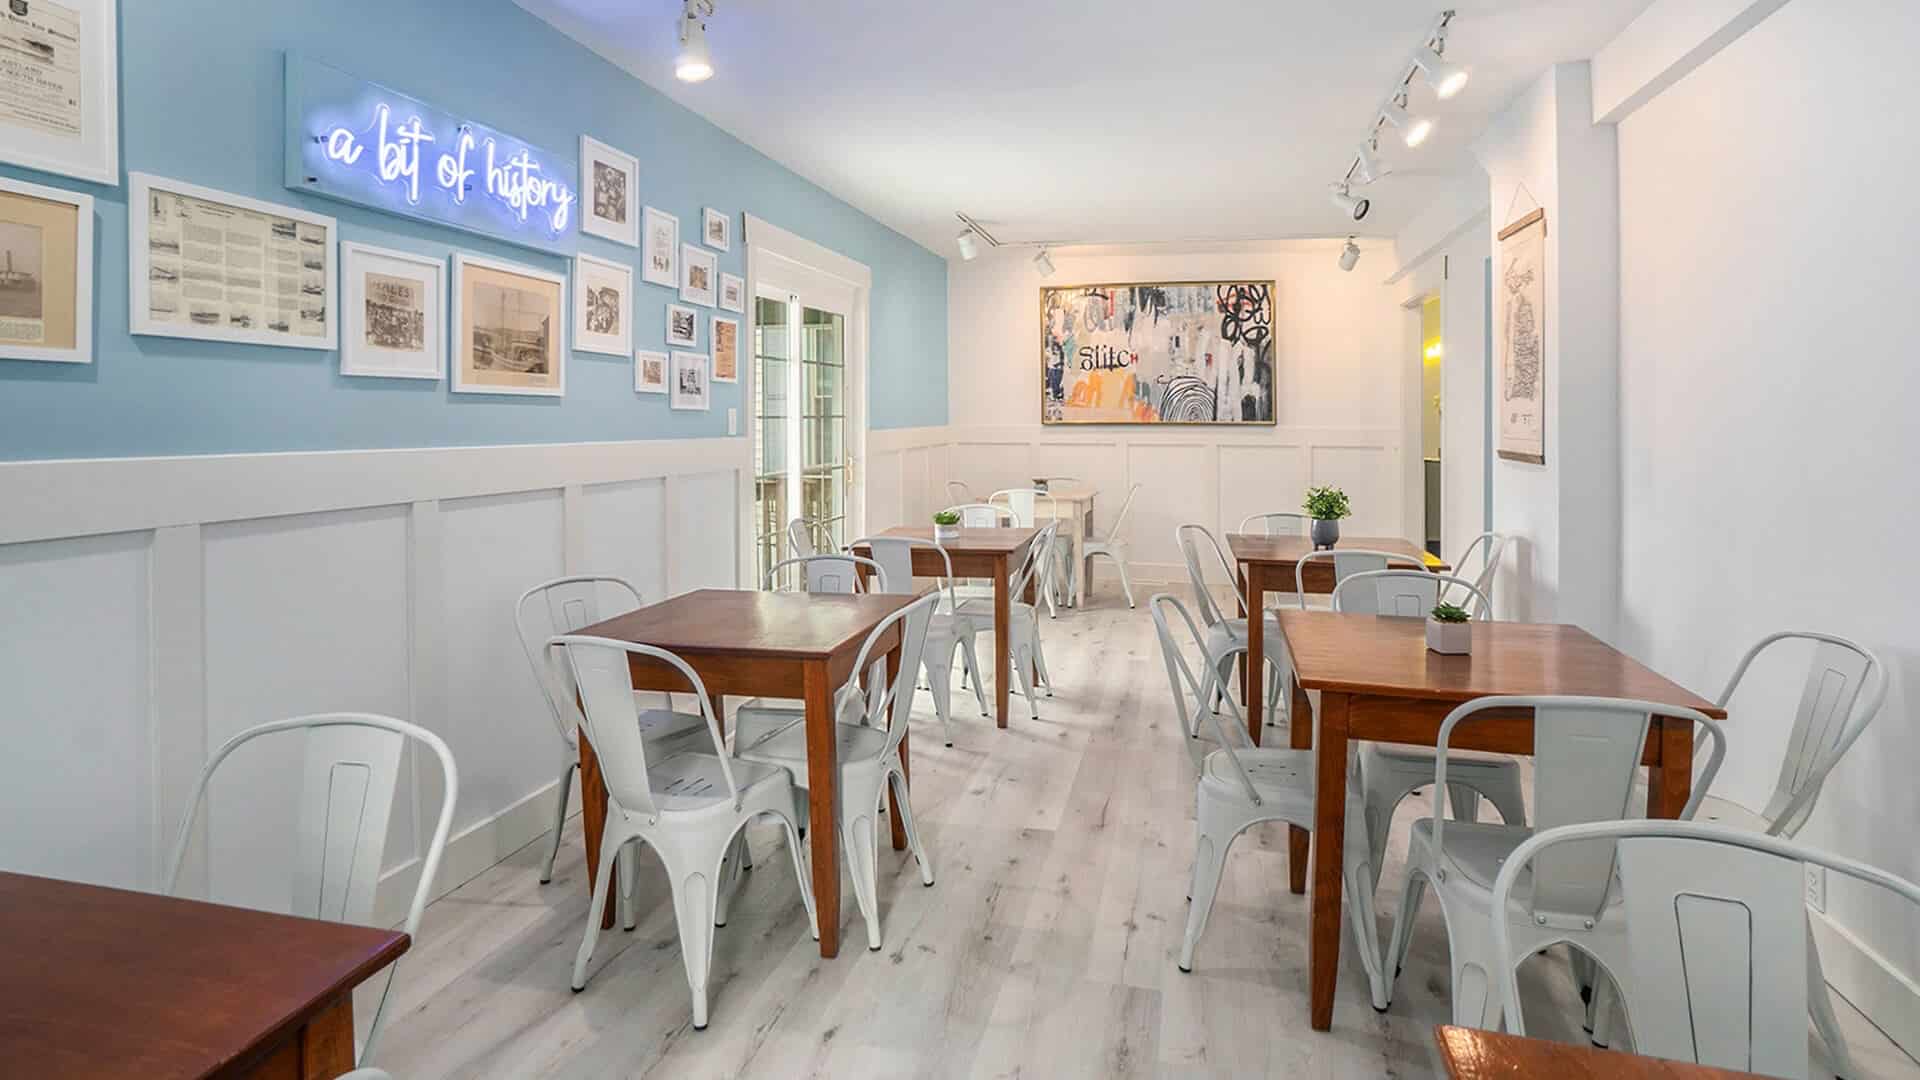 A dining room with light blue walls, white wainscotting, wood floors, and several wood tables with metal chairs throughout the room.